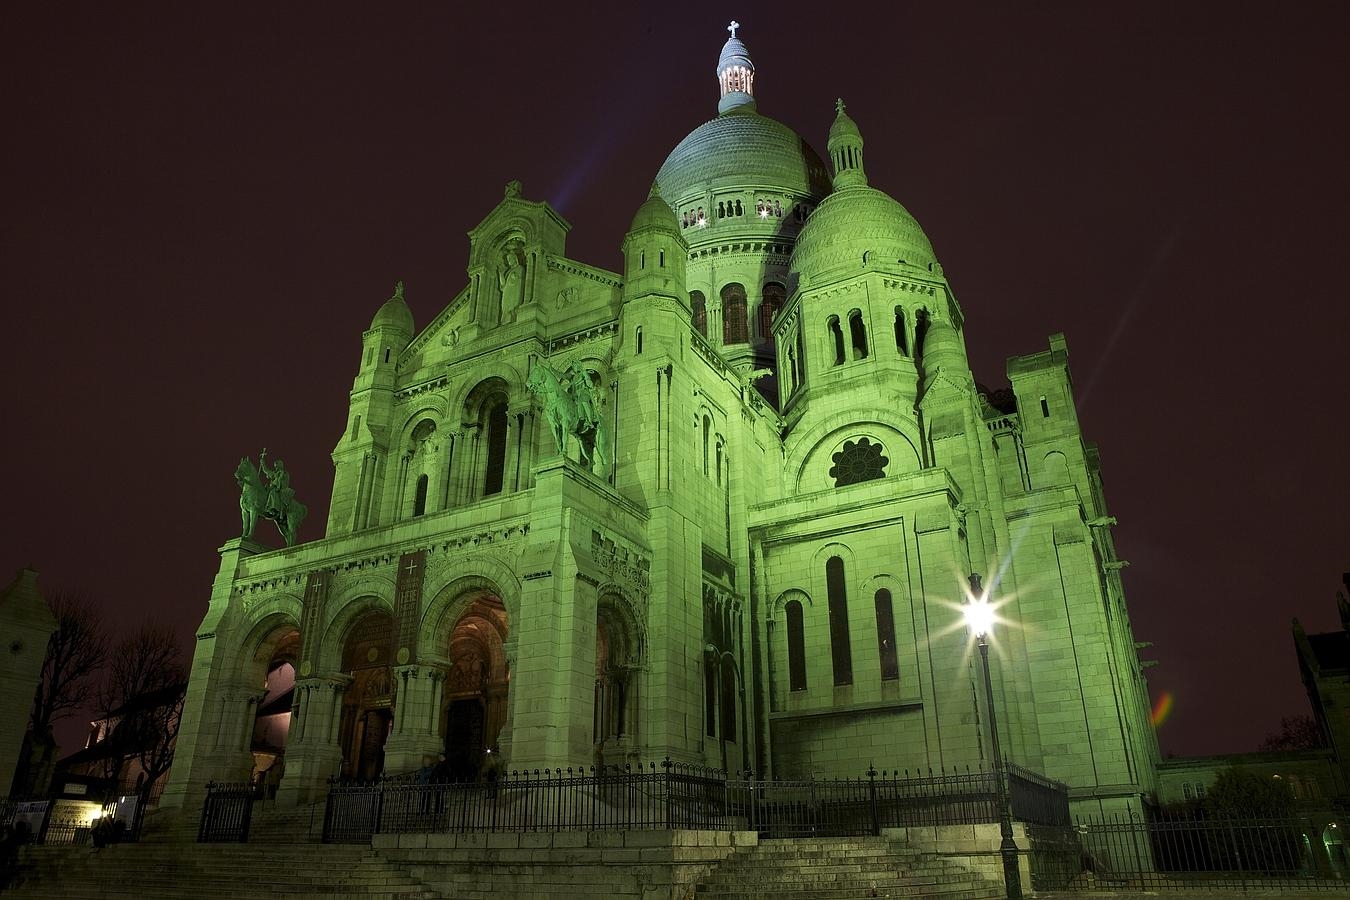 REPRO FREE 15/03/2015, Paris, France – Tourism Ireland’s annual Global Greening initiative, to celebrate the island of Ireland and St Patrick, has gone from strength to strength – from its beginning in 2010, with just the Sydney Opera House going green, to this year, when about 150 landmark buildings and iconic sites across the world will turn a shade of green for our national day. PIC SHOWS: The Sacré-Coeur Basilica in Paris joins Tourism Ireland’s Global Greening initiative, to celebrate the island of Ireland and St Patrick. Pic – Mathieu Sauerwein (no repro fee) Further press info – Sinéad Grace, Tourism Ireland 087 685 9027